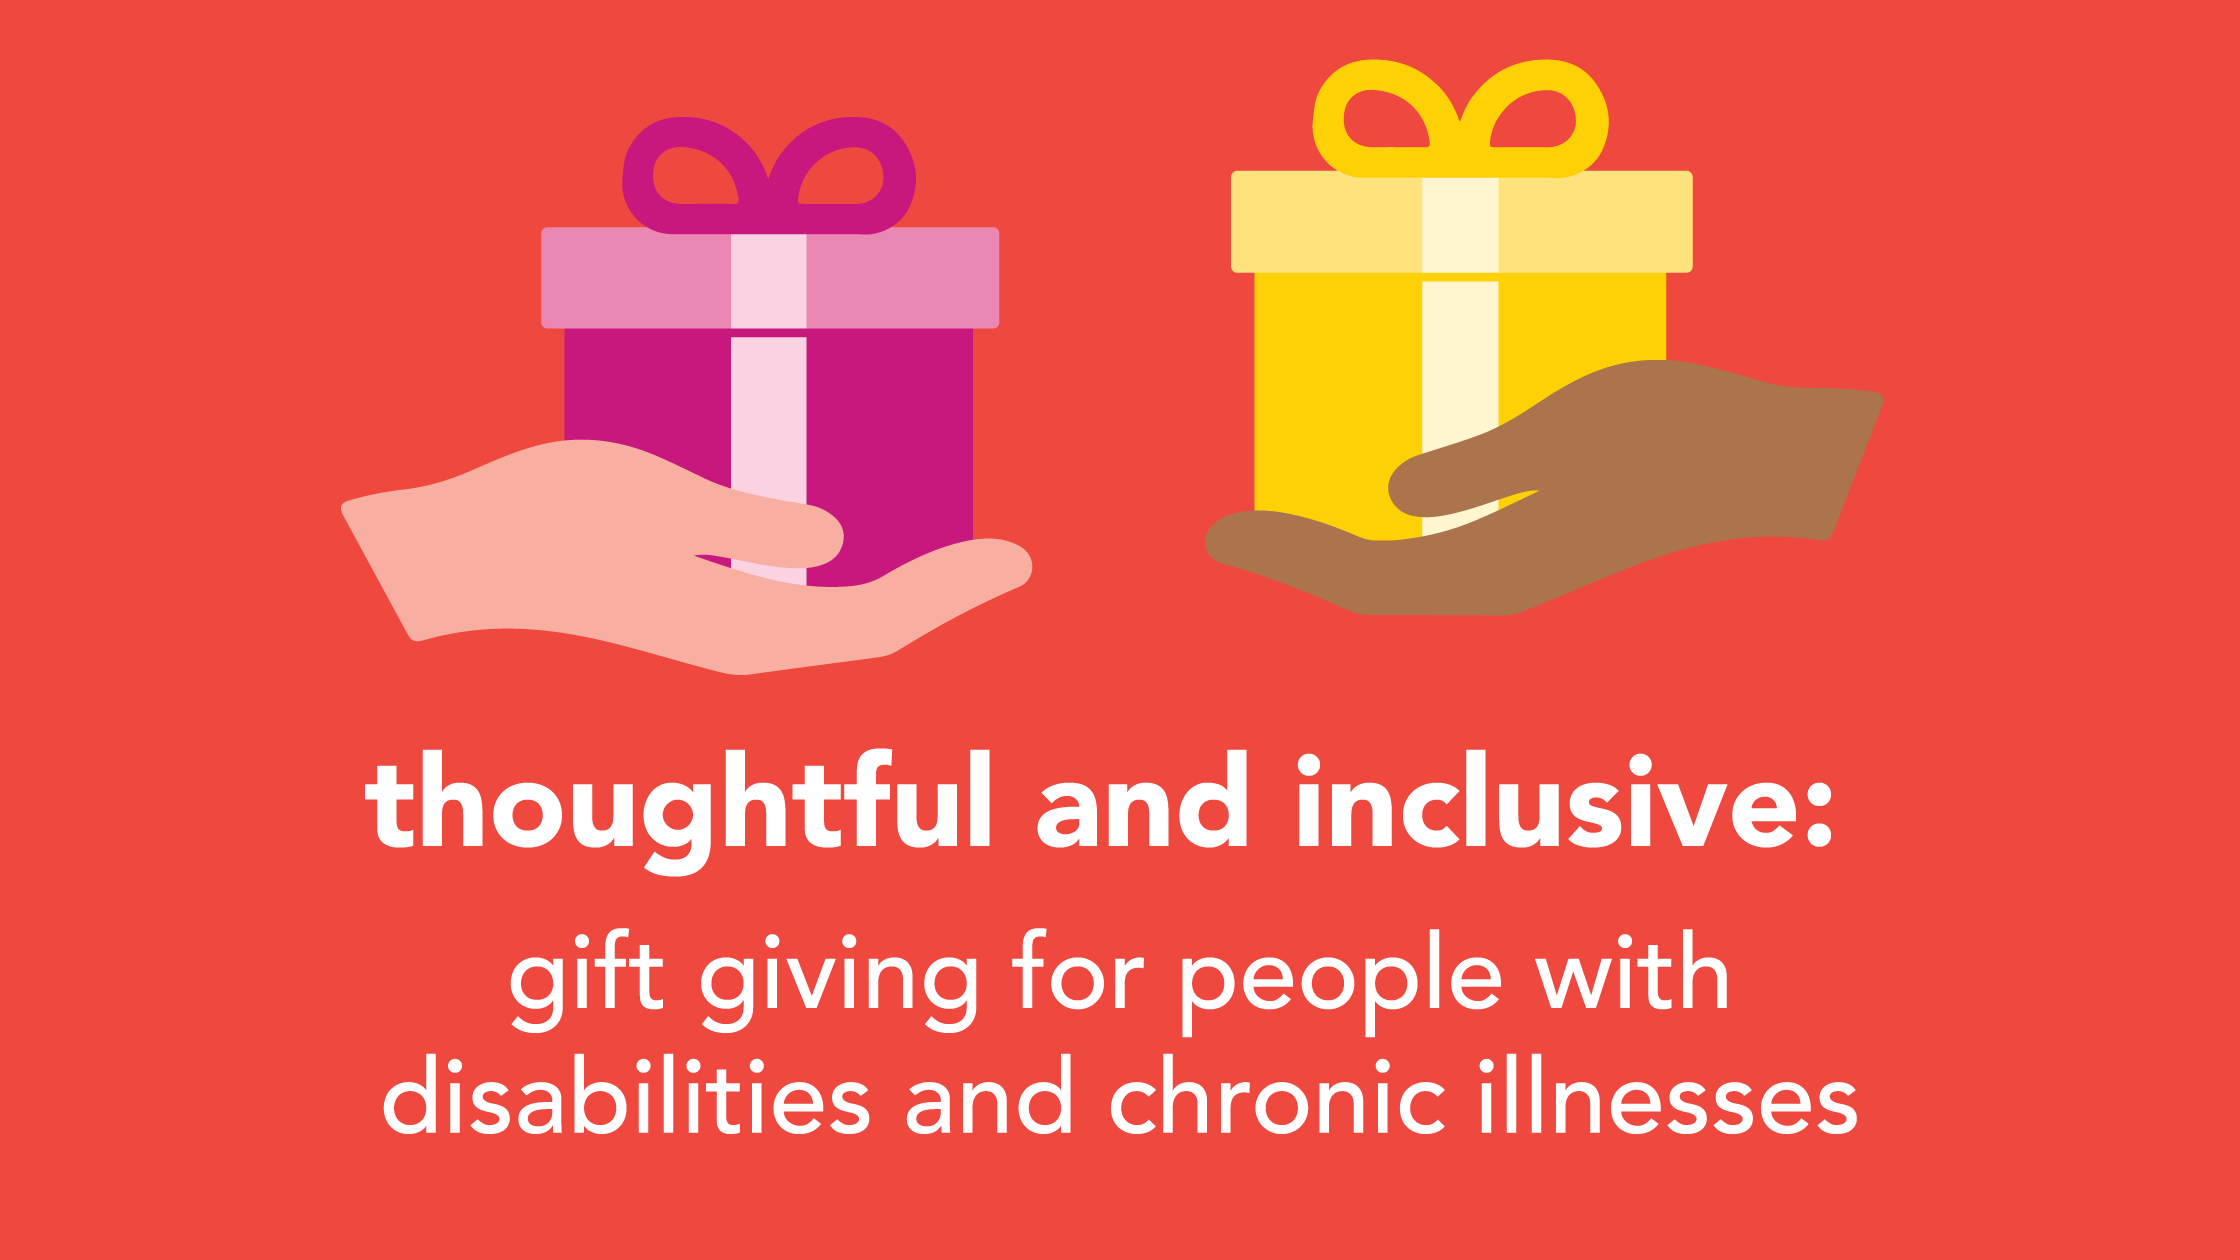 Embracing Inclusivity: Thoughtful Gift Ideas for People with Disabilities and Chronic Illnesses